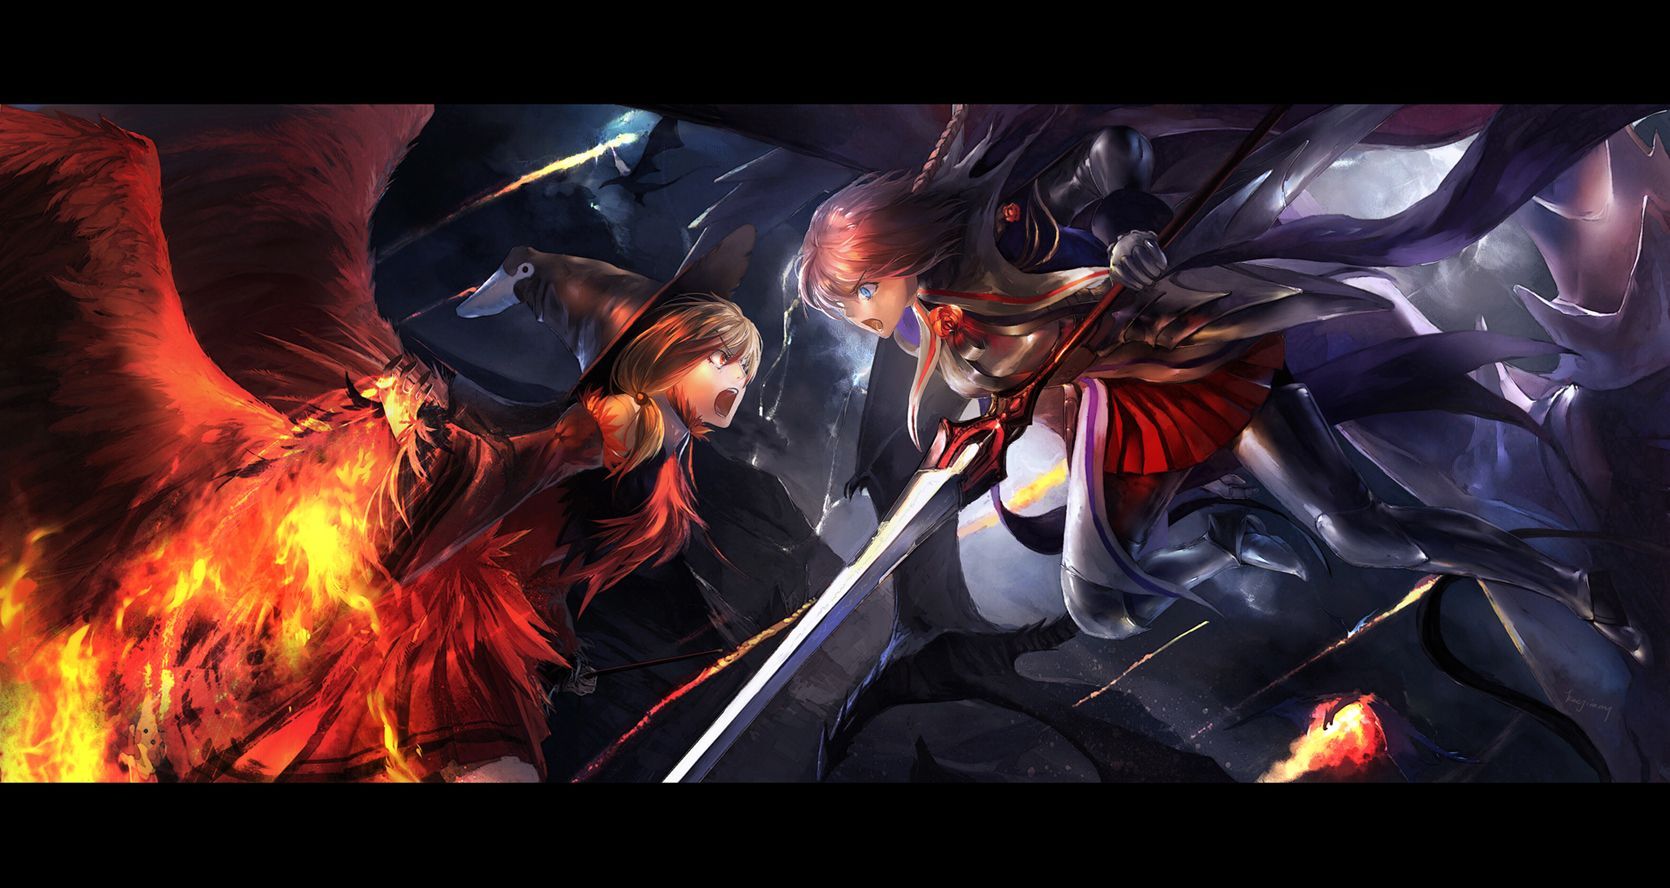 Anime Girls Fighting Wallpapers Wallpaper Cave